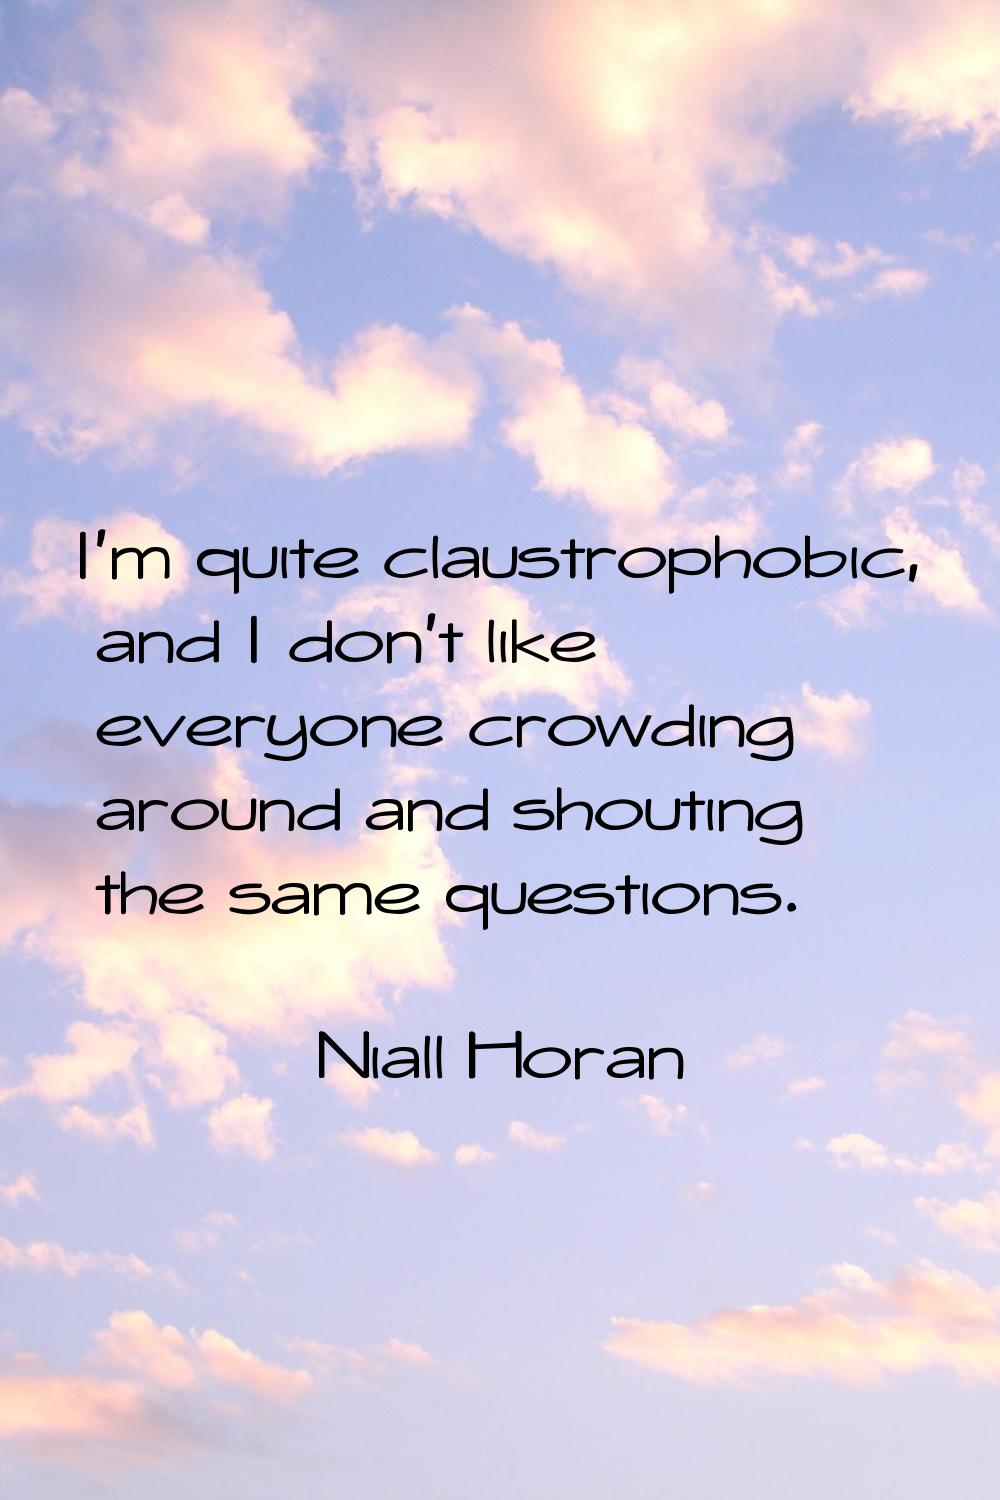 I'm quite claustrophobic, and I don't like everyone crowding around and shouting the same questions